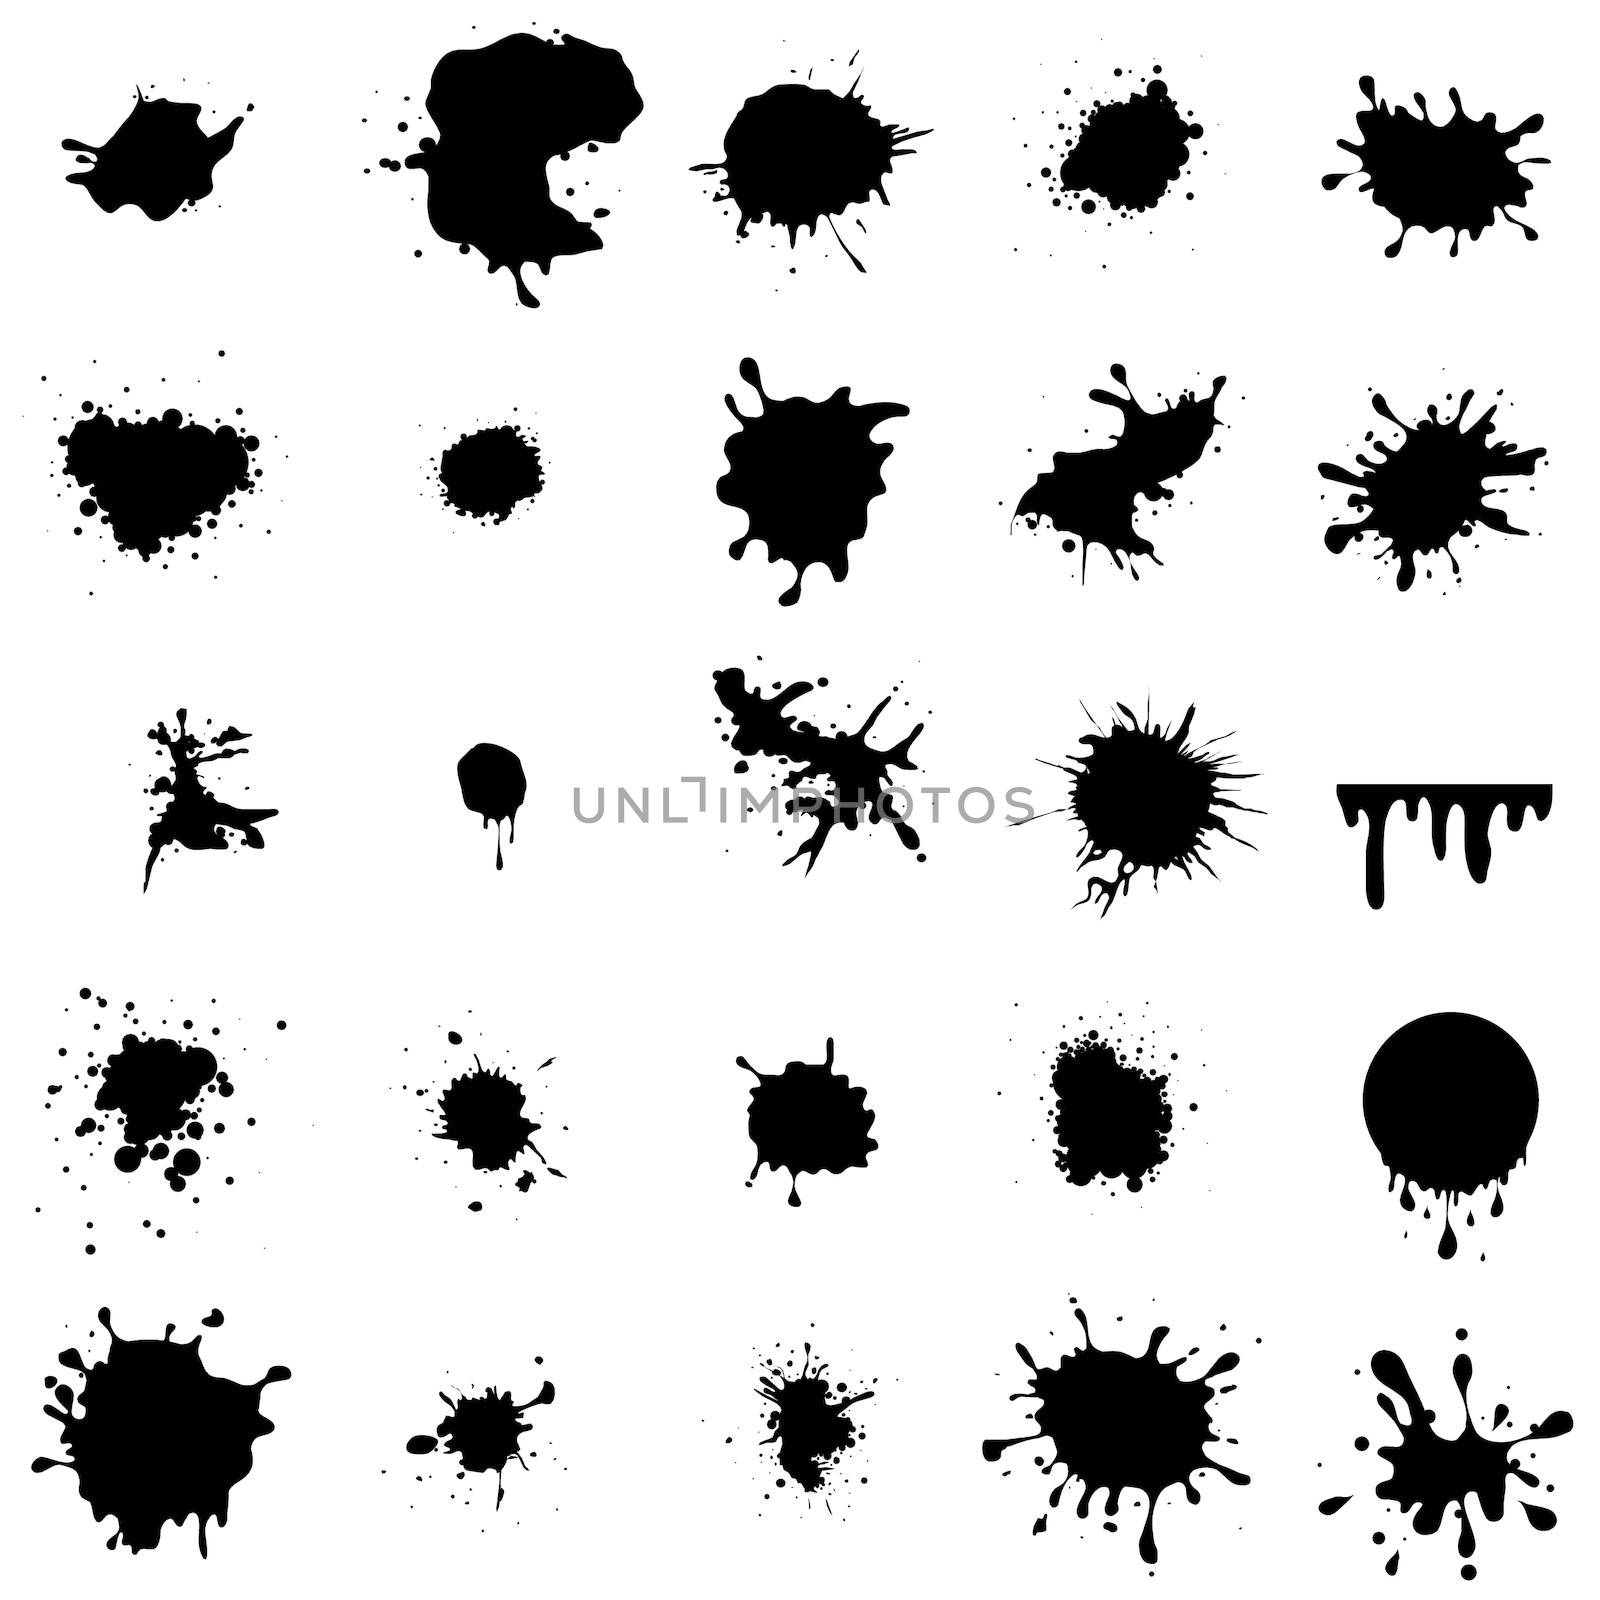 Illustration of ink splats and drips